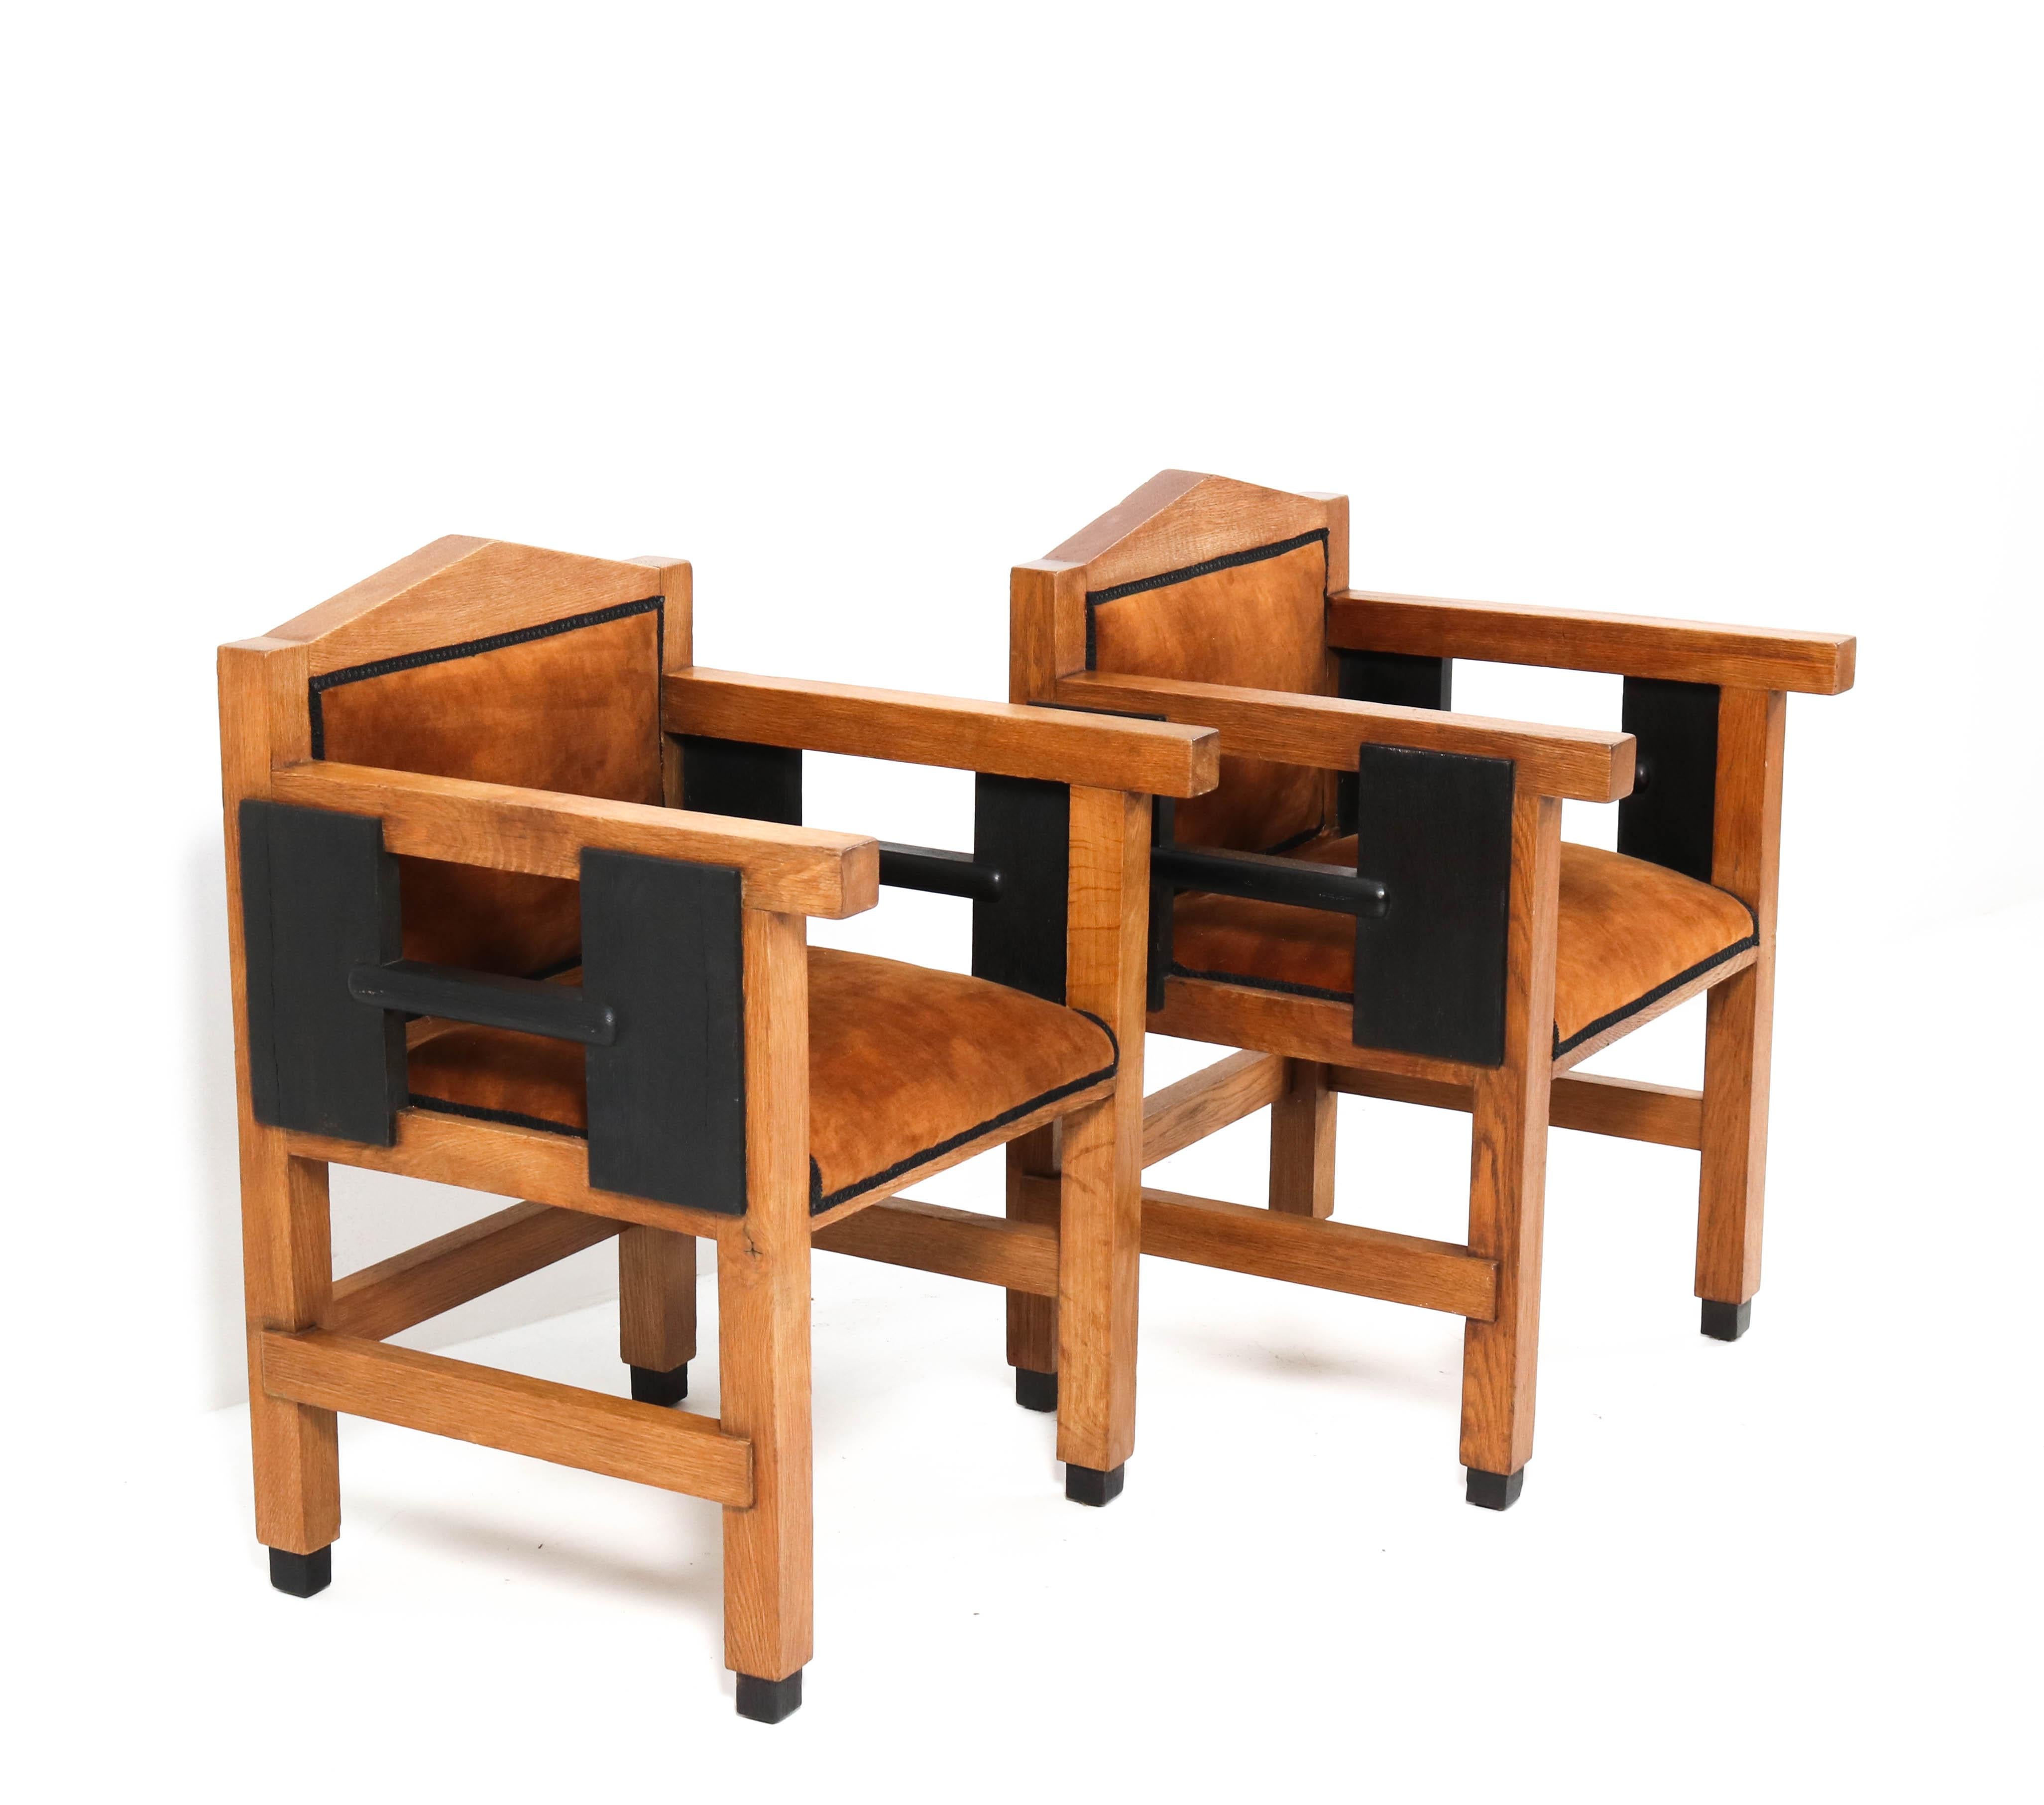 Magnificent and very rare pair Art Deco Haagse School armchairs.
Design by Jacques Grubben.
Striking Dutch design from the 1930s.
Solid oak with original black lacquered details.
Re-upholstered with cognac colored velvet.
These wonderful pieces